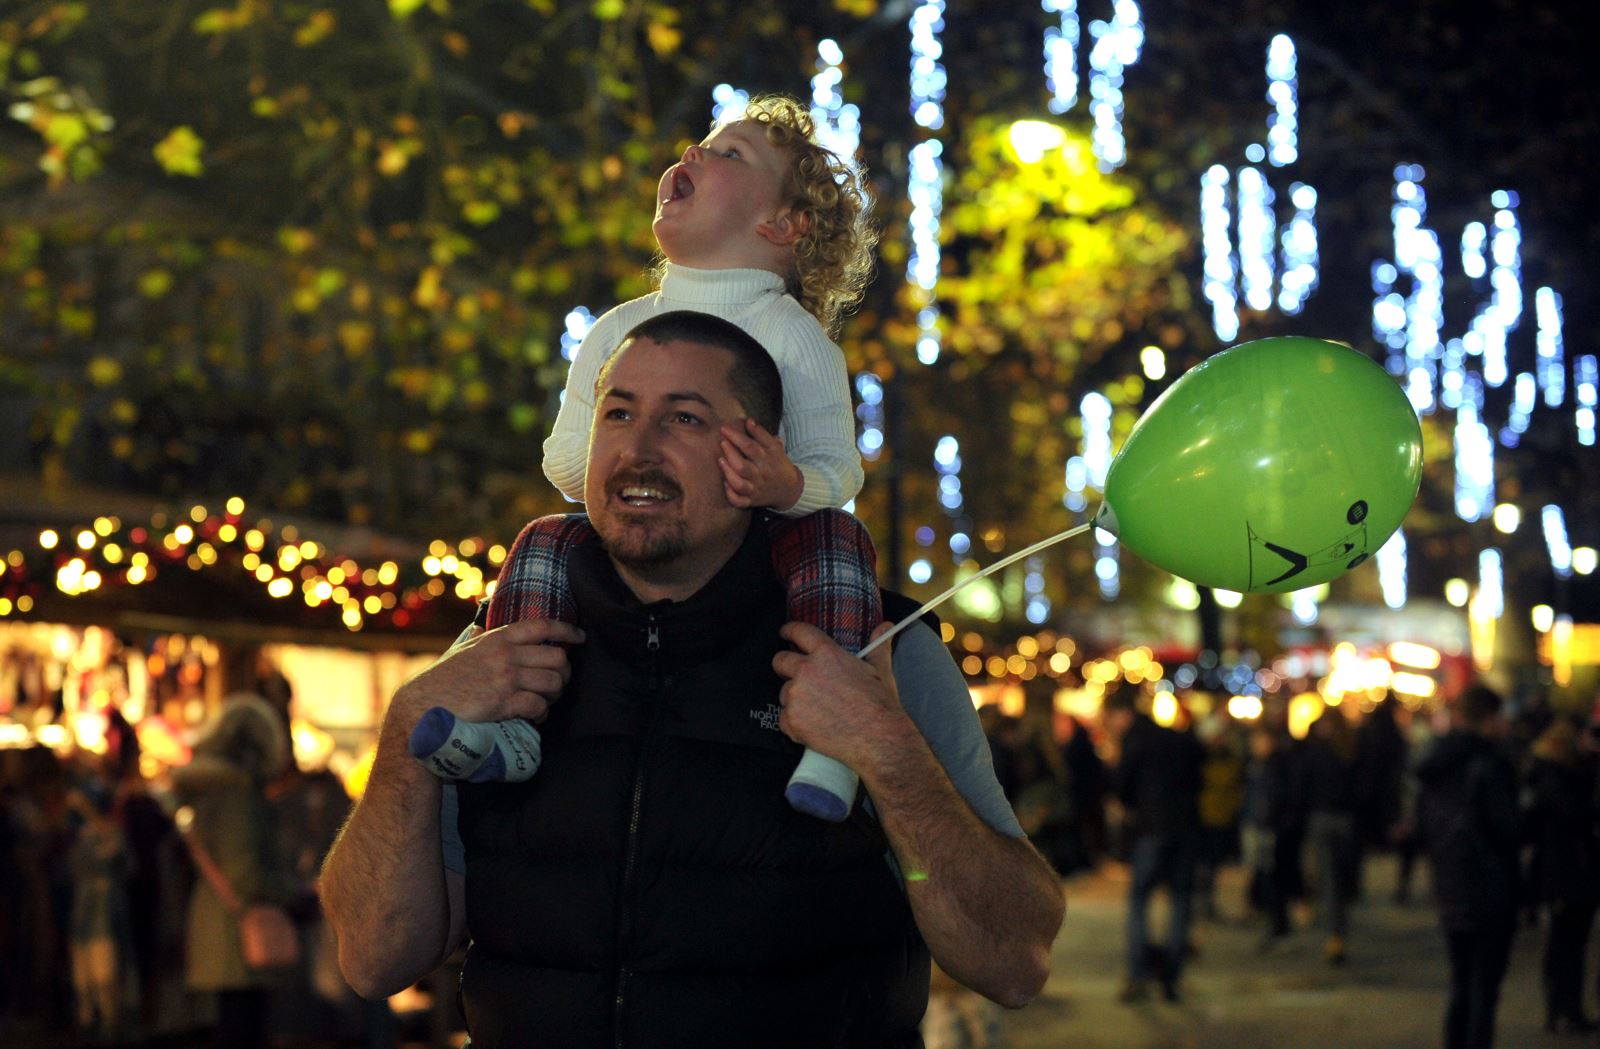 Child on father's shoulders enjoying the Christmas lights